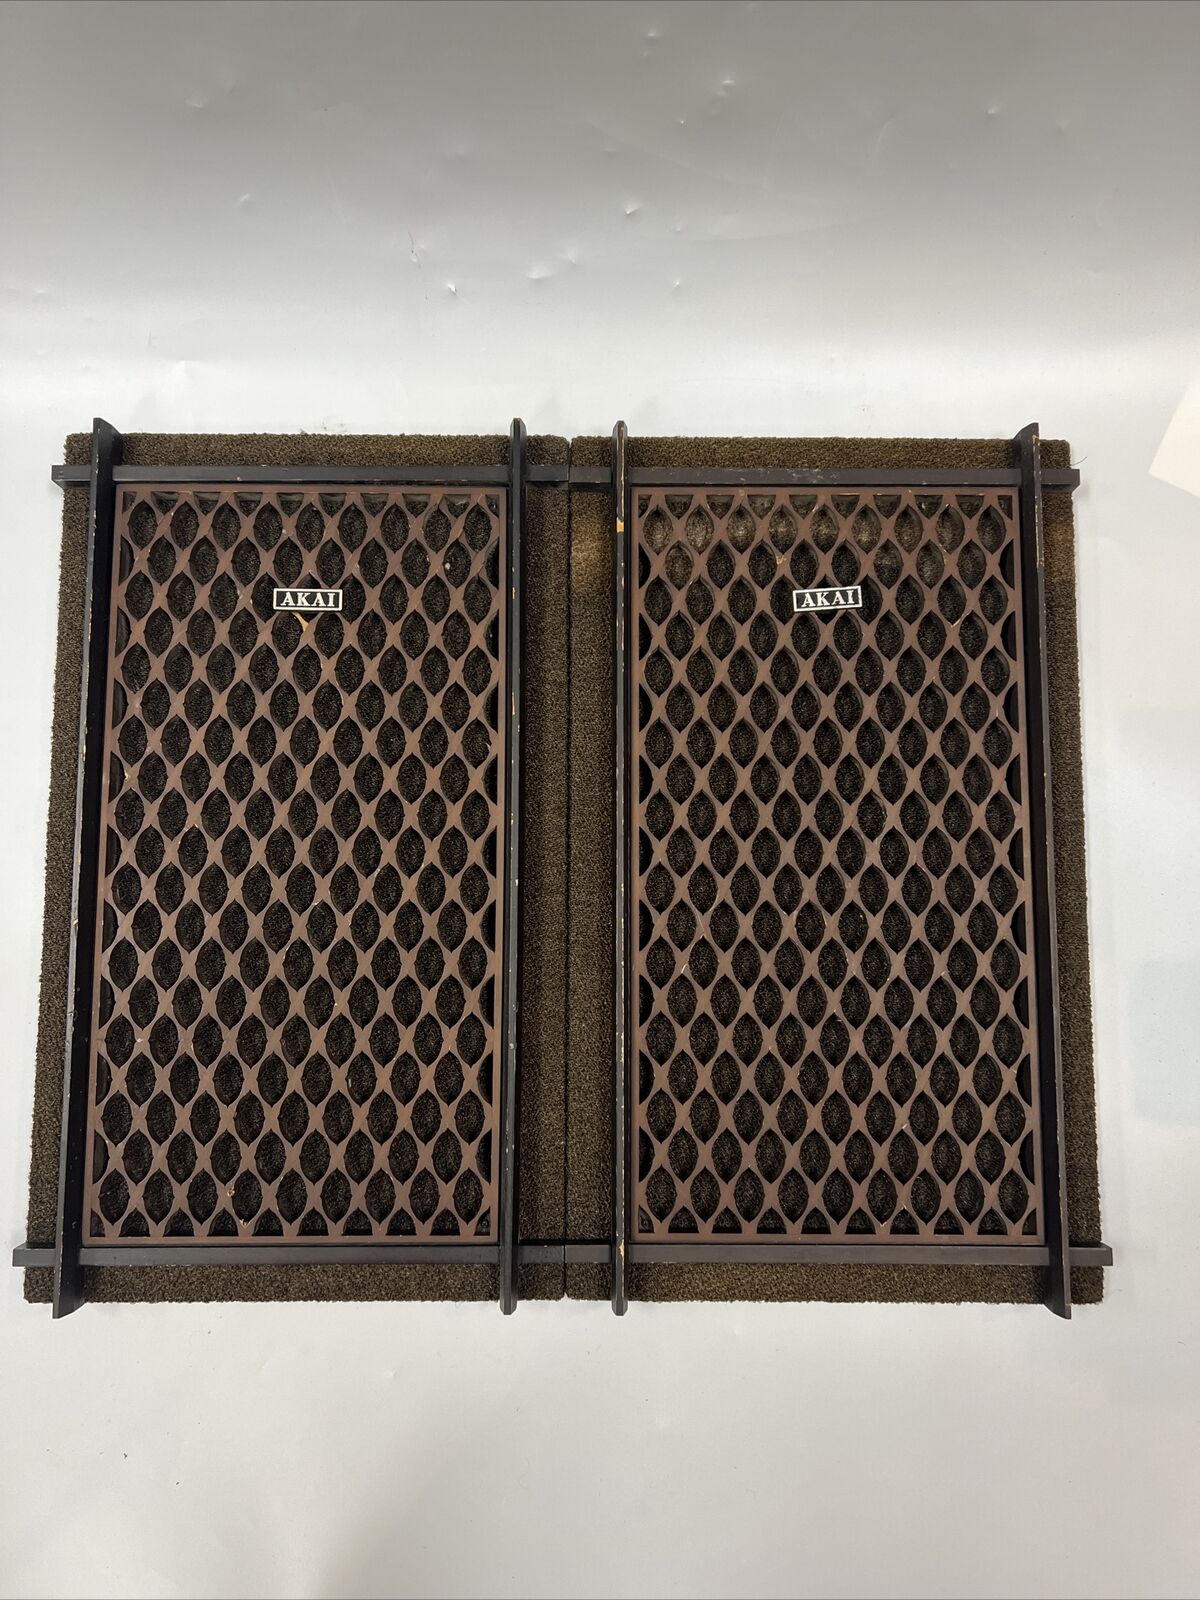 Vintage 70s Pair Of AKAI SW-125 Wood Grill Speaker Cabinet Covers Made in Japan